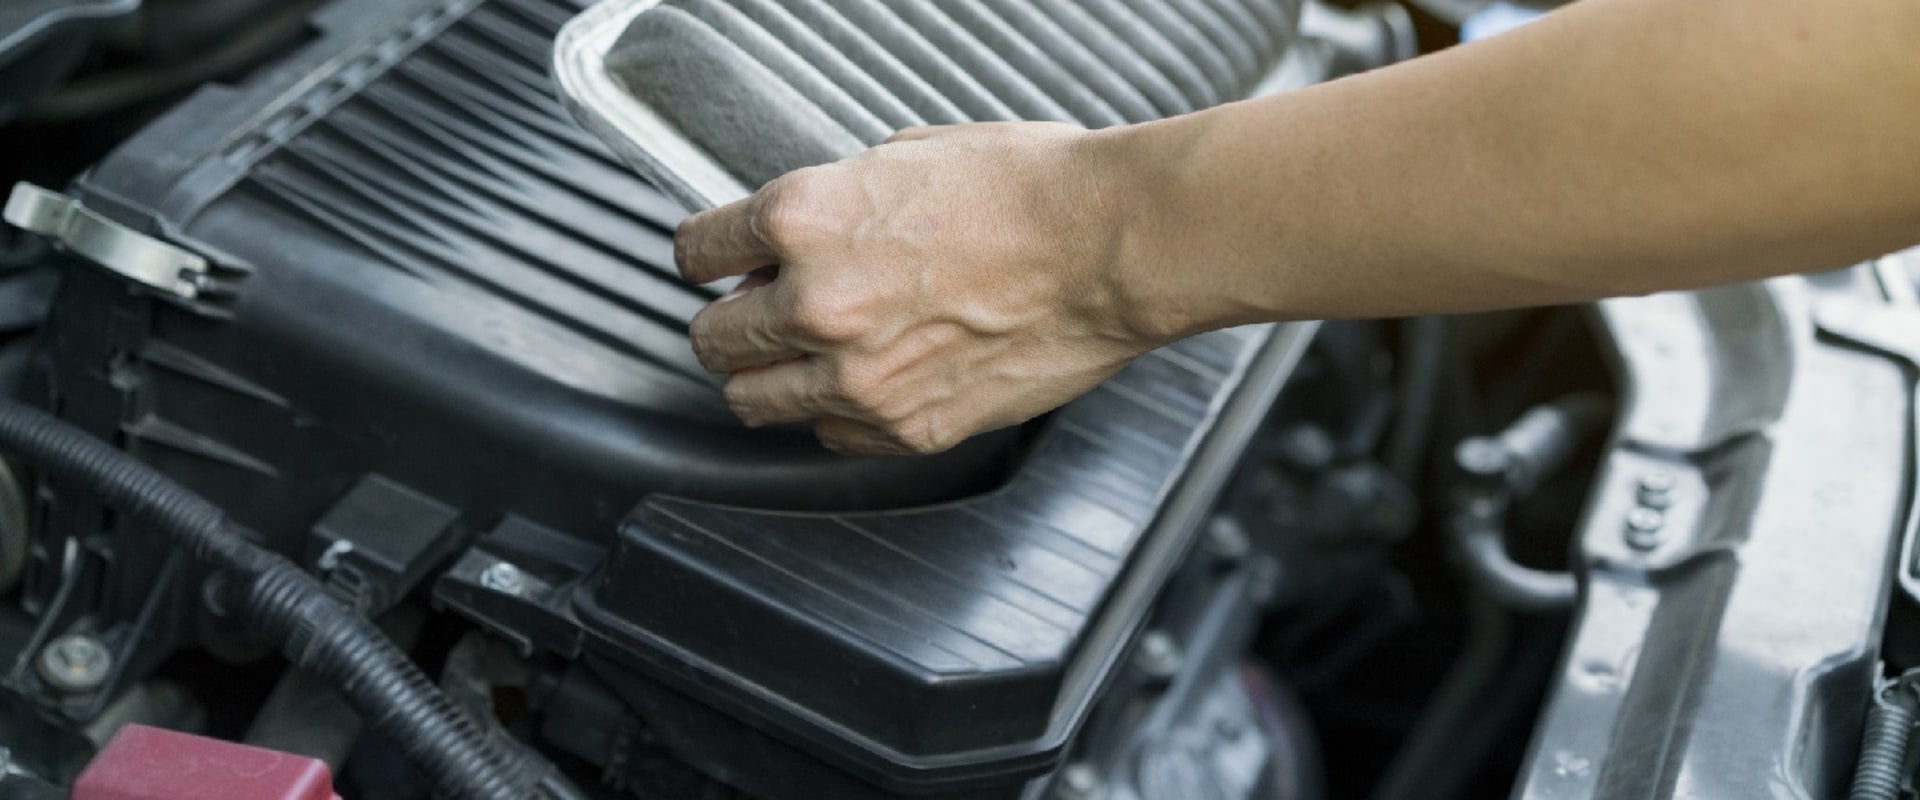 When is the Right Time to Clean or Replace Your Car's Air Filter?